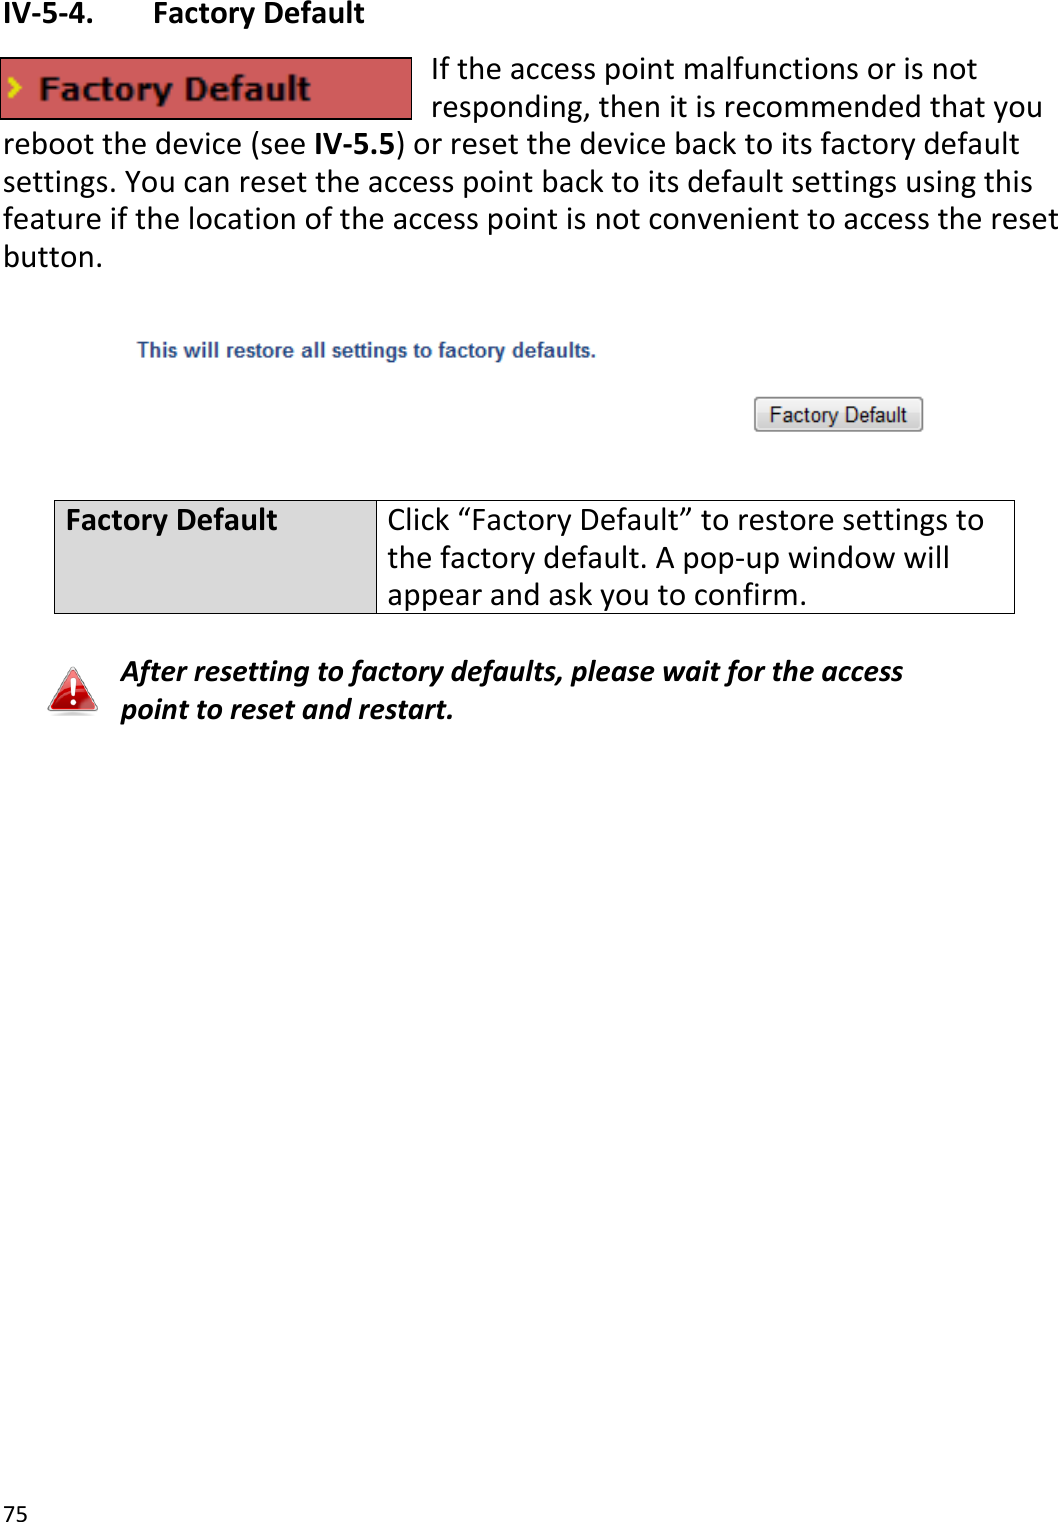 75  IV-5-4.   Factory Default If the access point malfunctions or is not responding, then it is recommended that you reboot the device (see IV-5.5) or reset the device back to its factory default settings. You can reset the access point back to its default settings using this feature if the location of the access point is not convenient to access the reset button.    Factory Default Click “Factory Default” to restore settings to the factory default. A pop-up window will appear and ask you to confirm.  After resetting to factory defaults, please wait for the access point to reset and restart.    